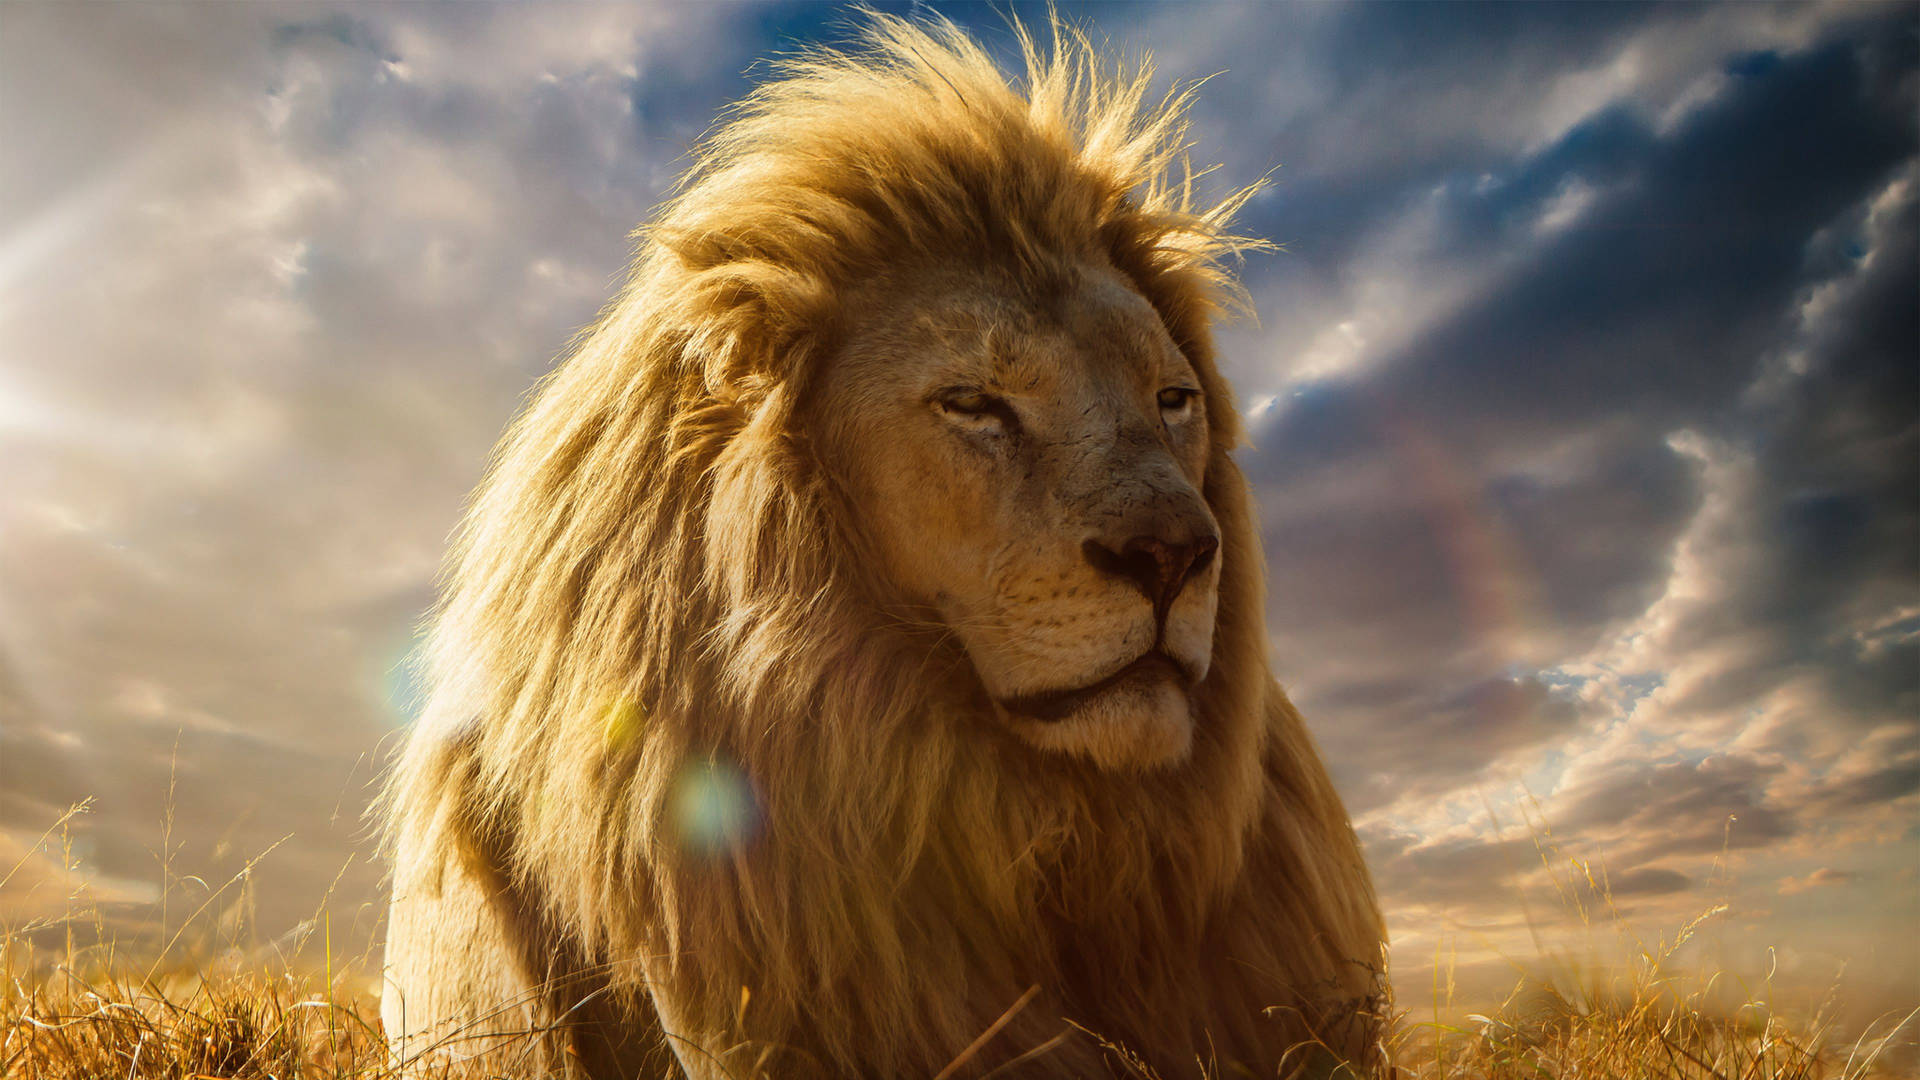 The Lion King Realistic Wallpaper